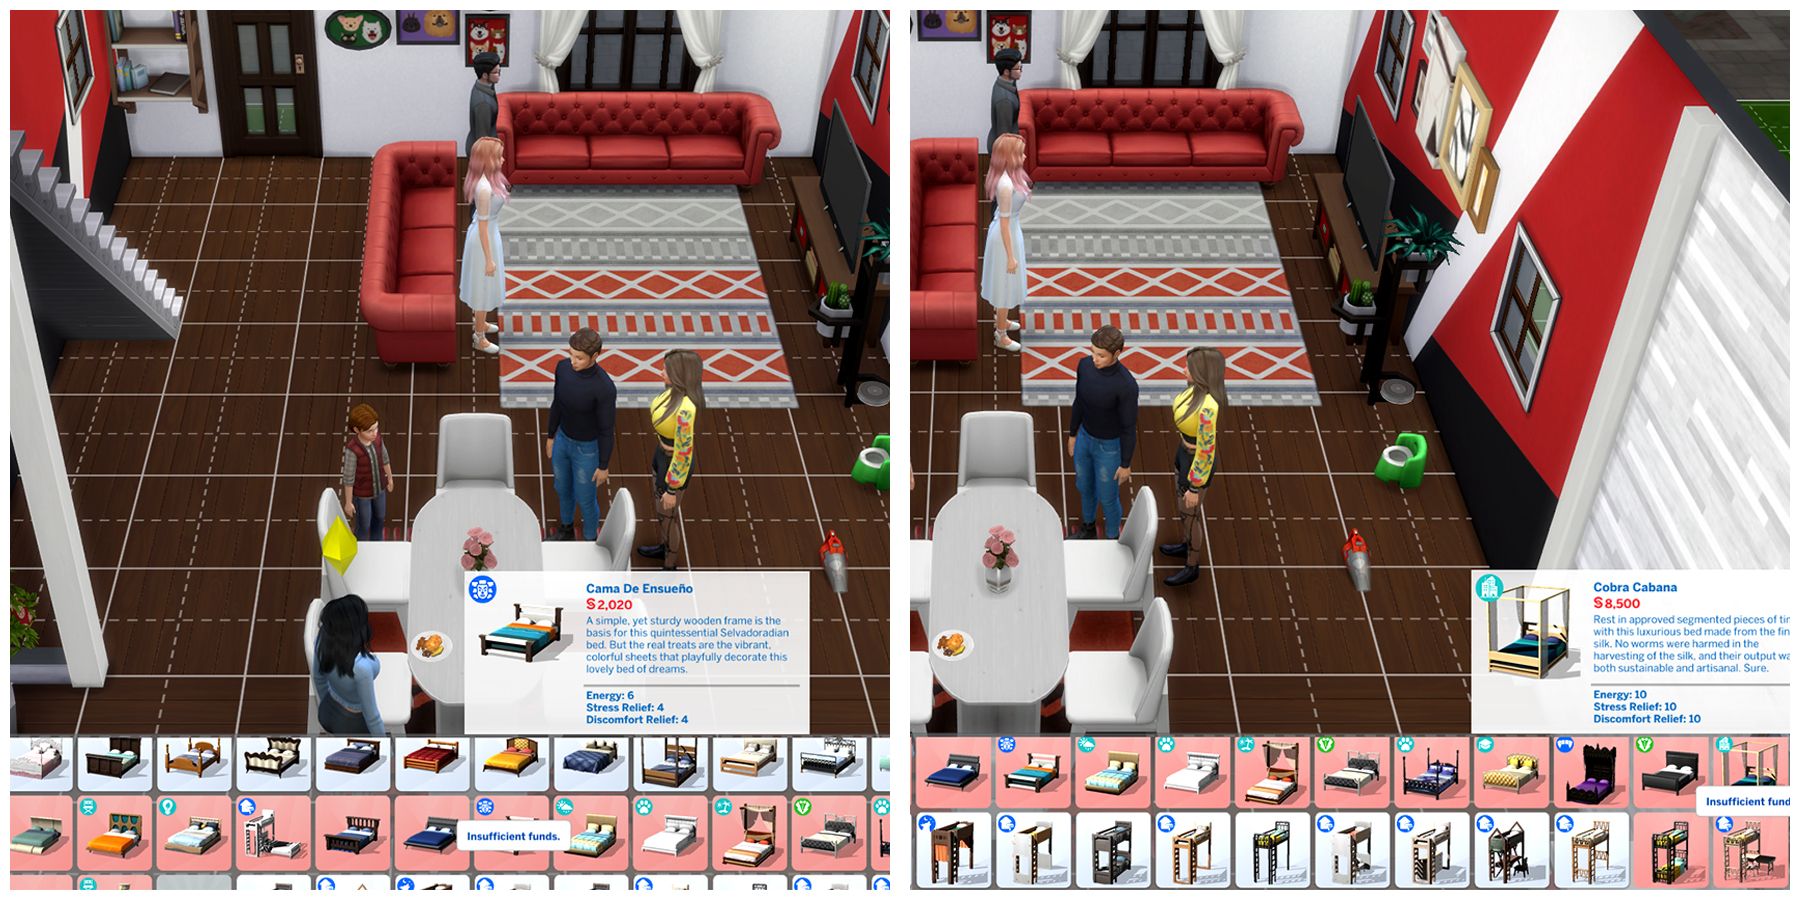 expensive and medium quality beds in the sims 4